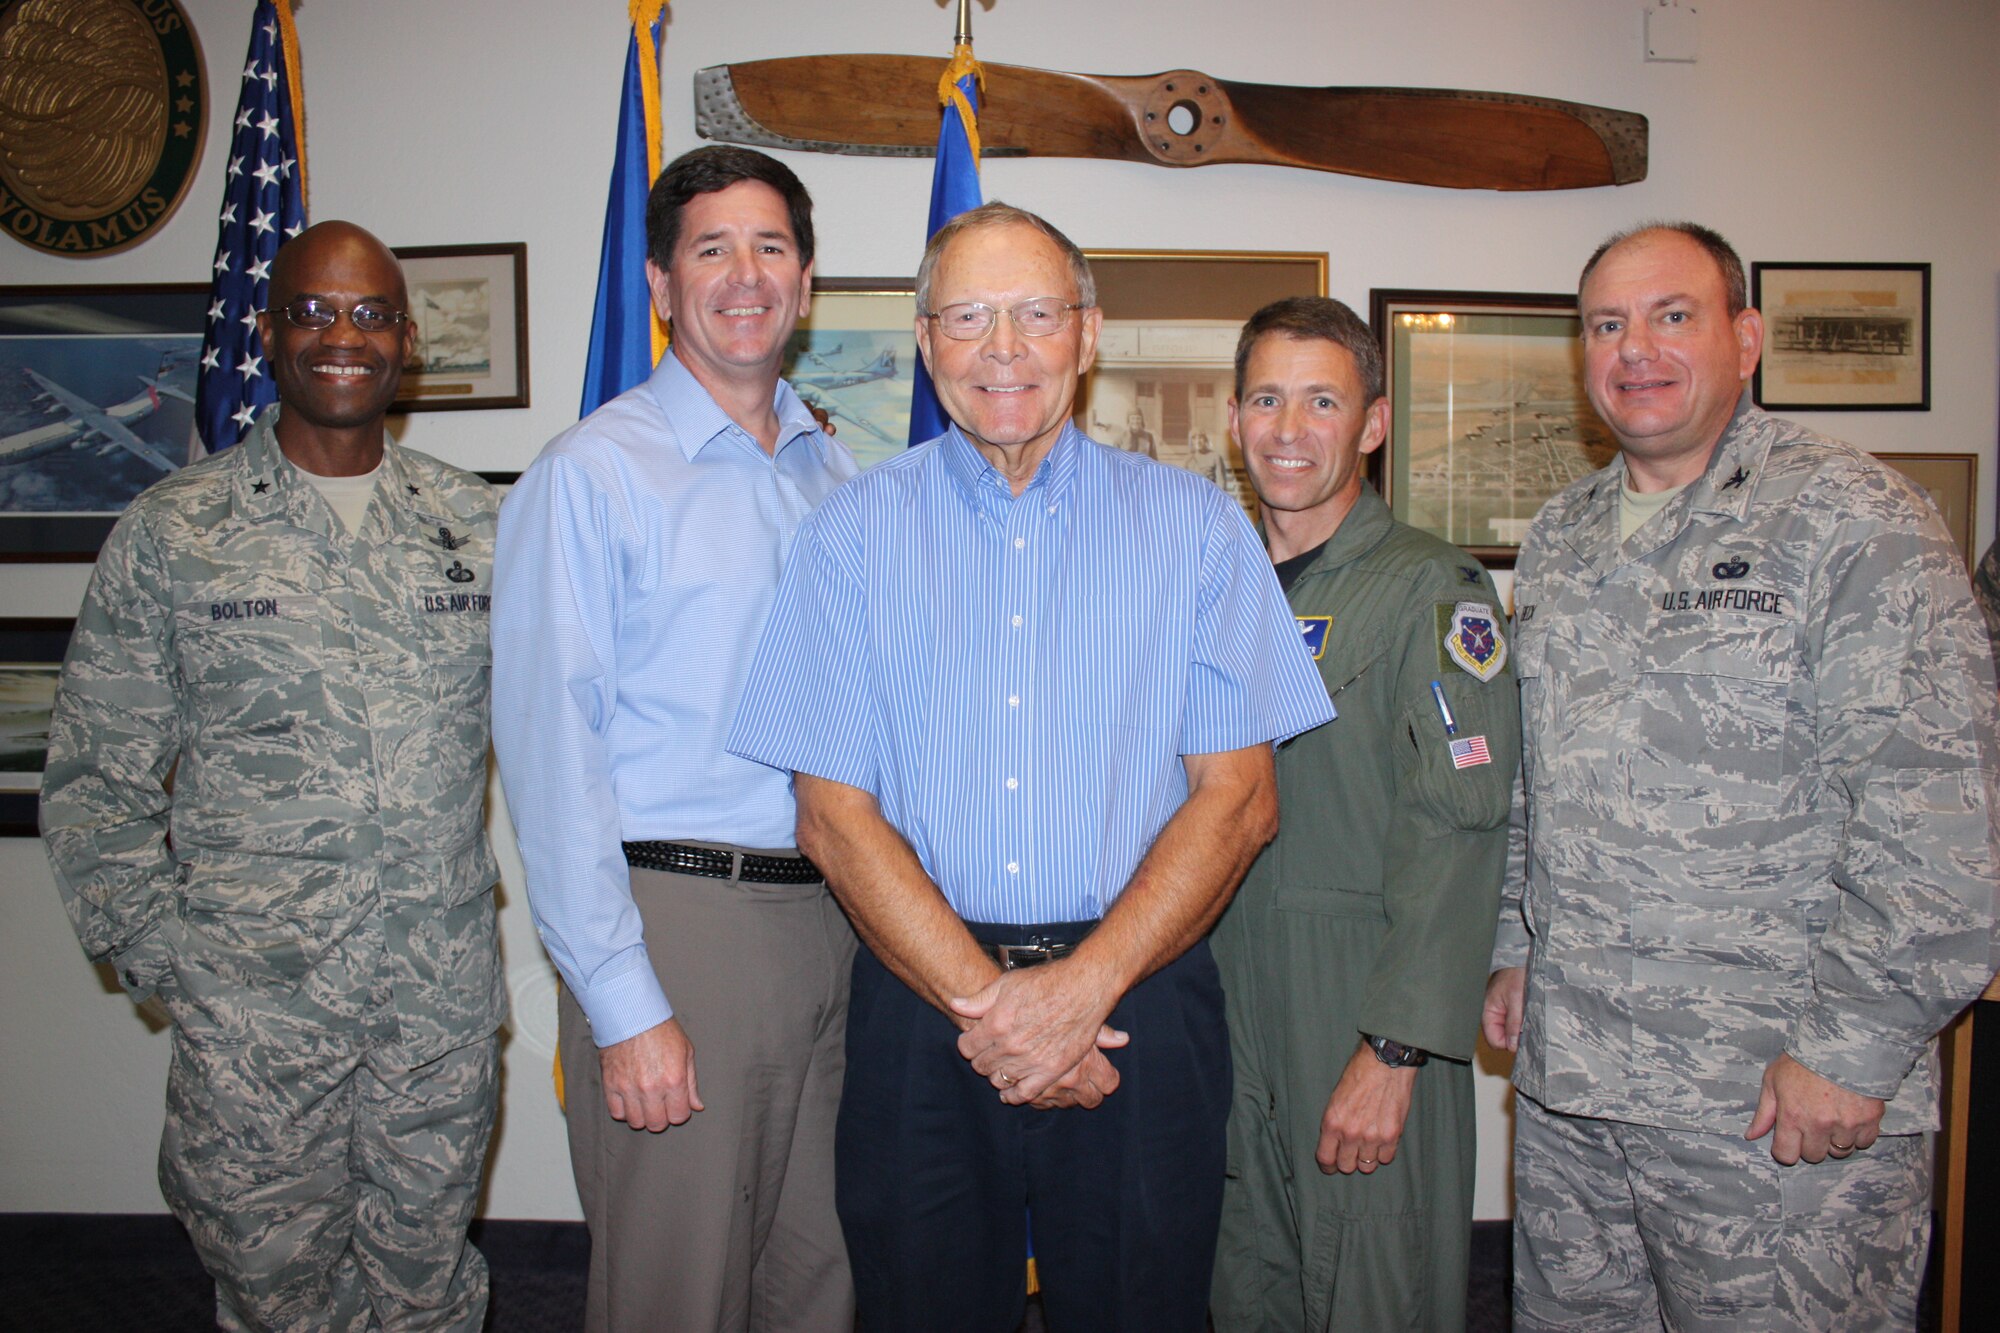 Jerry McAnulty (center) with (left to right) 45th Space Wing Commander Brig. Gen. Edward L. Bolton Jr., Col. (ret.) Thomas Bouthiller, 45th SW Vice Commander Stephen Butler and 45th Mission Support Group Commander Col. Charles Beck at Mr. McAnulty's retirement as head of Patrick Air Force Base's branch of Project Emeritus March 12 at The Tides. (U.S. Air Force photo/Airman 1st Class David Dobrydney)